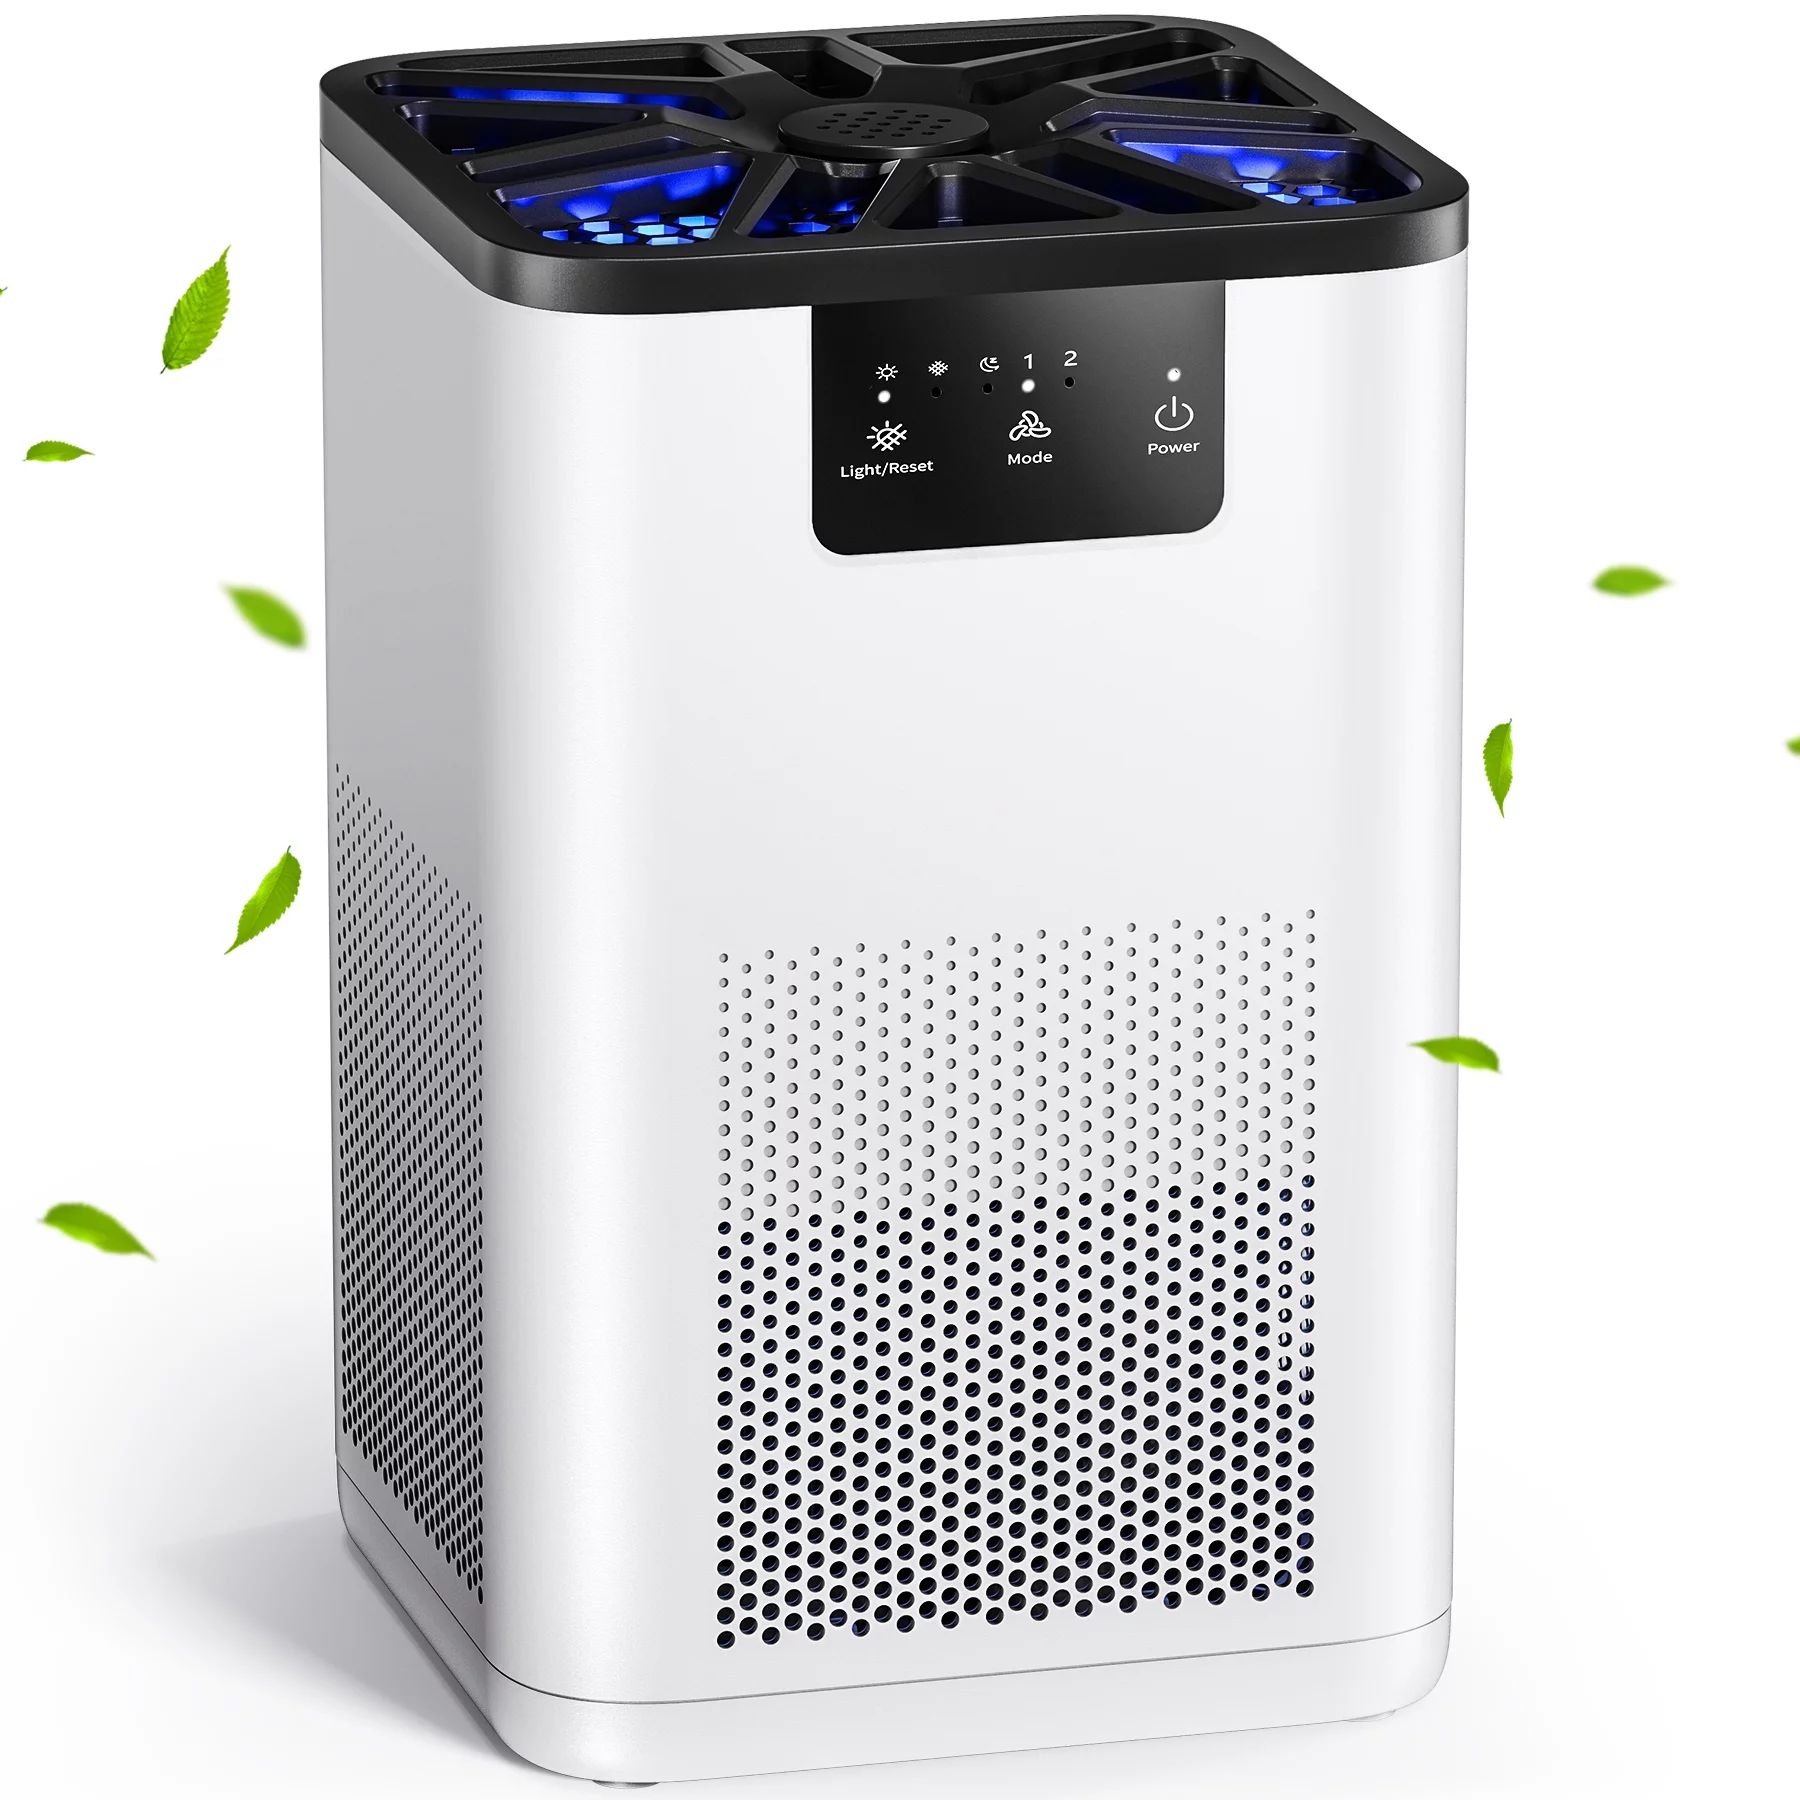 ALROCKET Air Purifier, with H13 True HEPA Filter, Remove 99.9% Smoke Dust Allergies for 300 SQ.ft | Walmart (US)